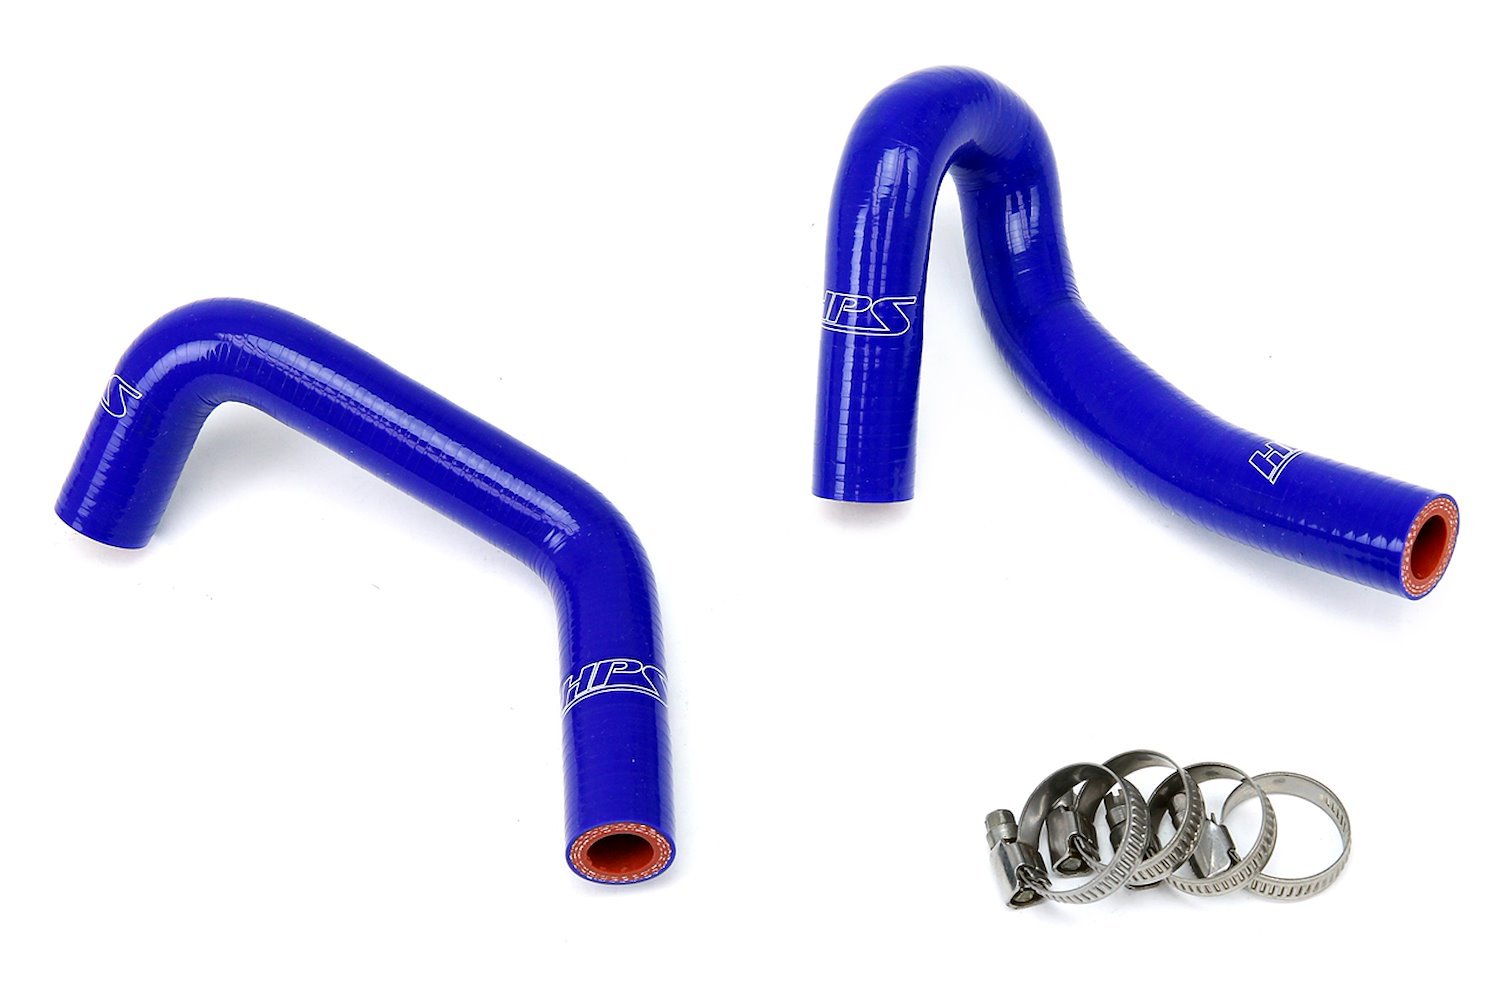 57-1311-BLUE Heater Hose Kit, High-Temp 3-Ply Reinforced Silicone, Replace OEM Rubber Heater Coolant Hoses